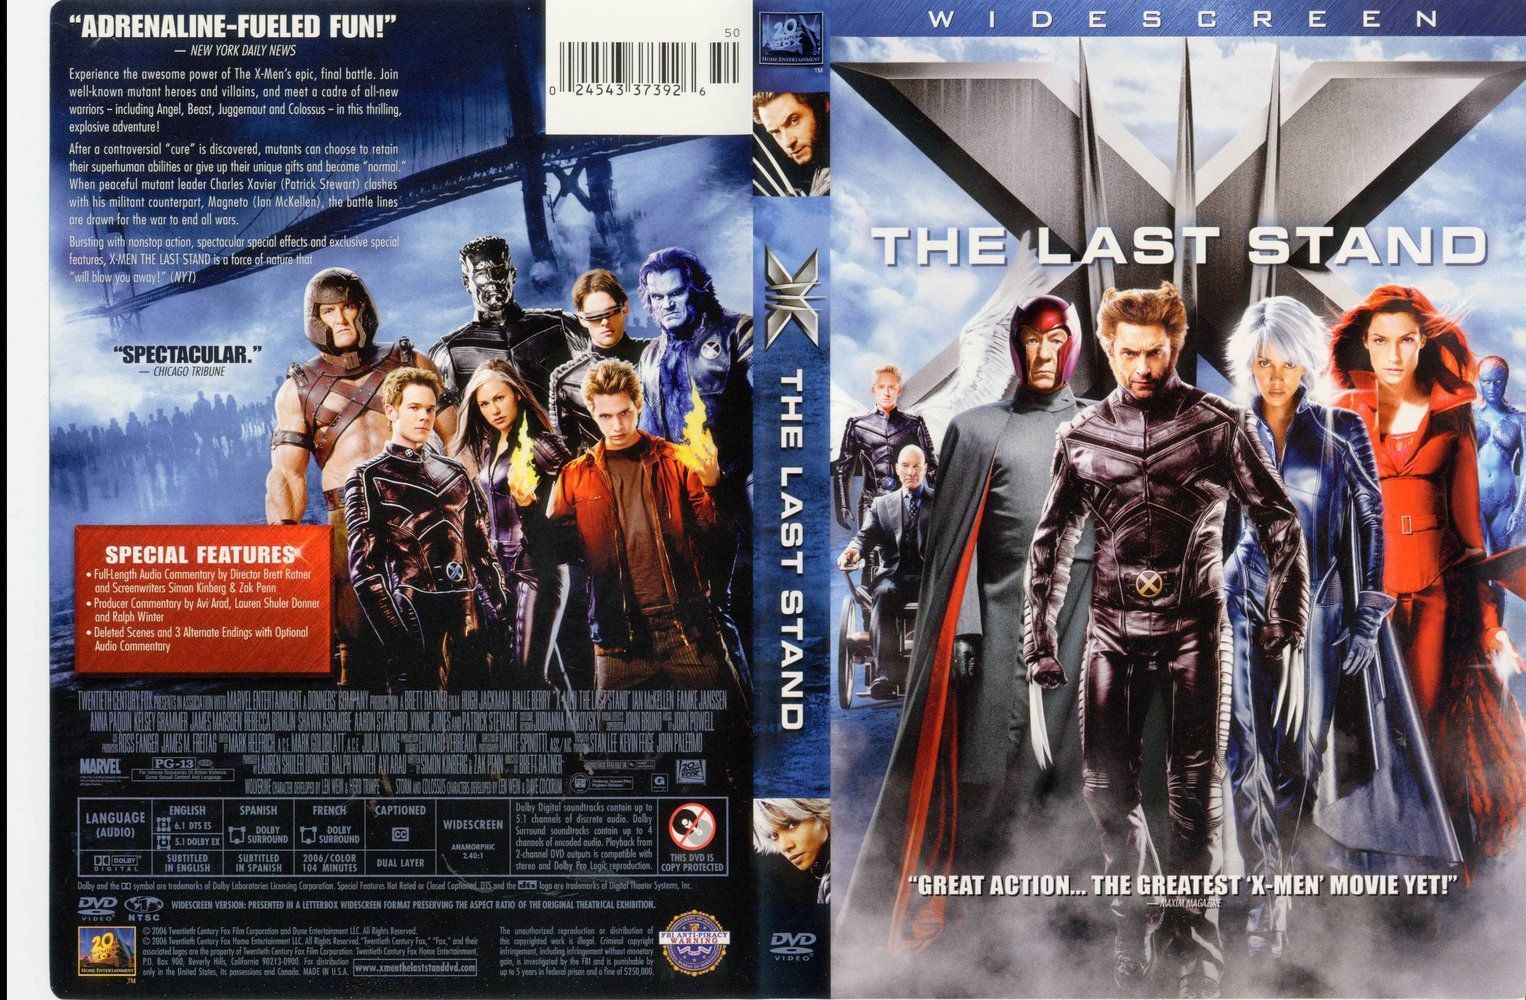 X Men 3 Widescreen Dvd Us Dvd Covers Cover Century Over 500 000 Album Art Covers For Free